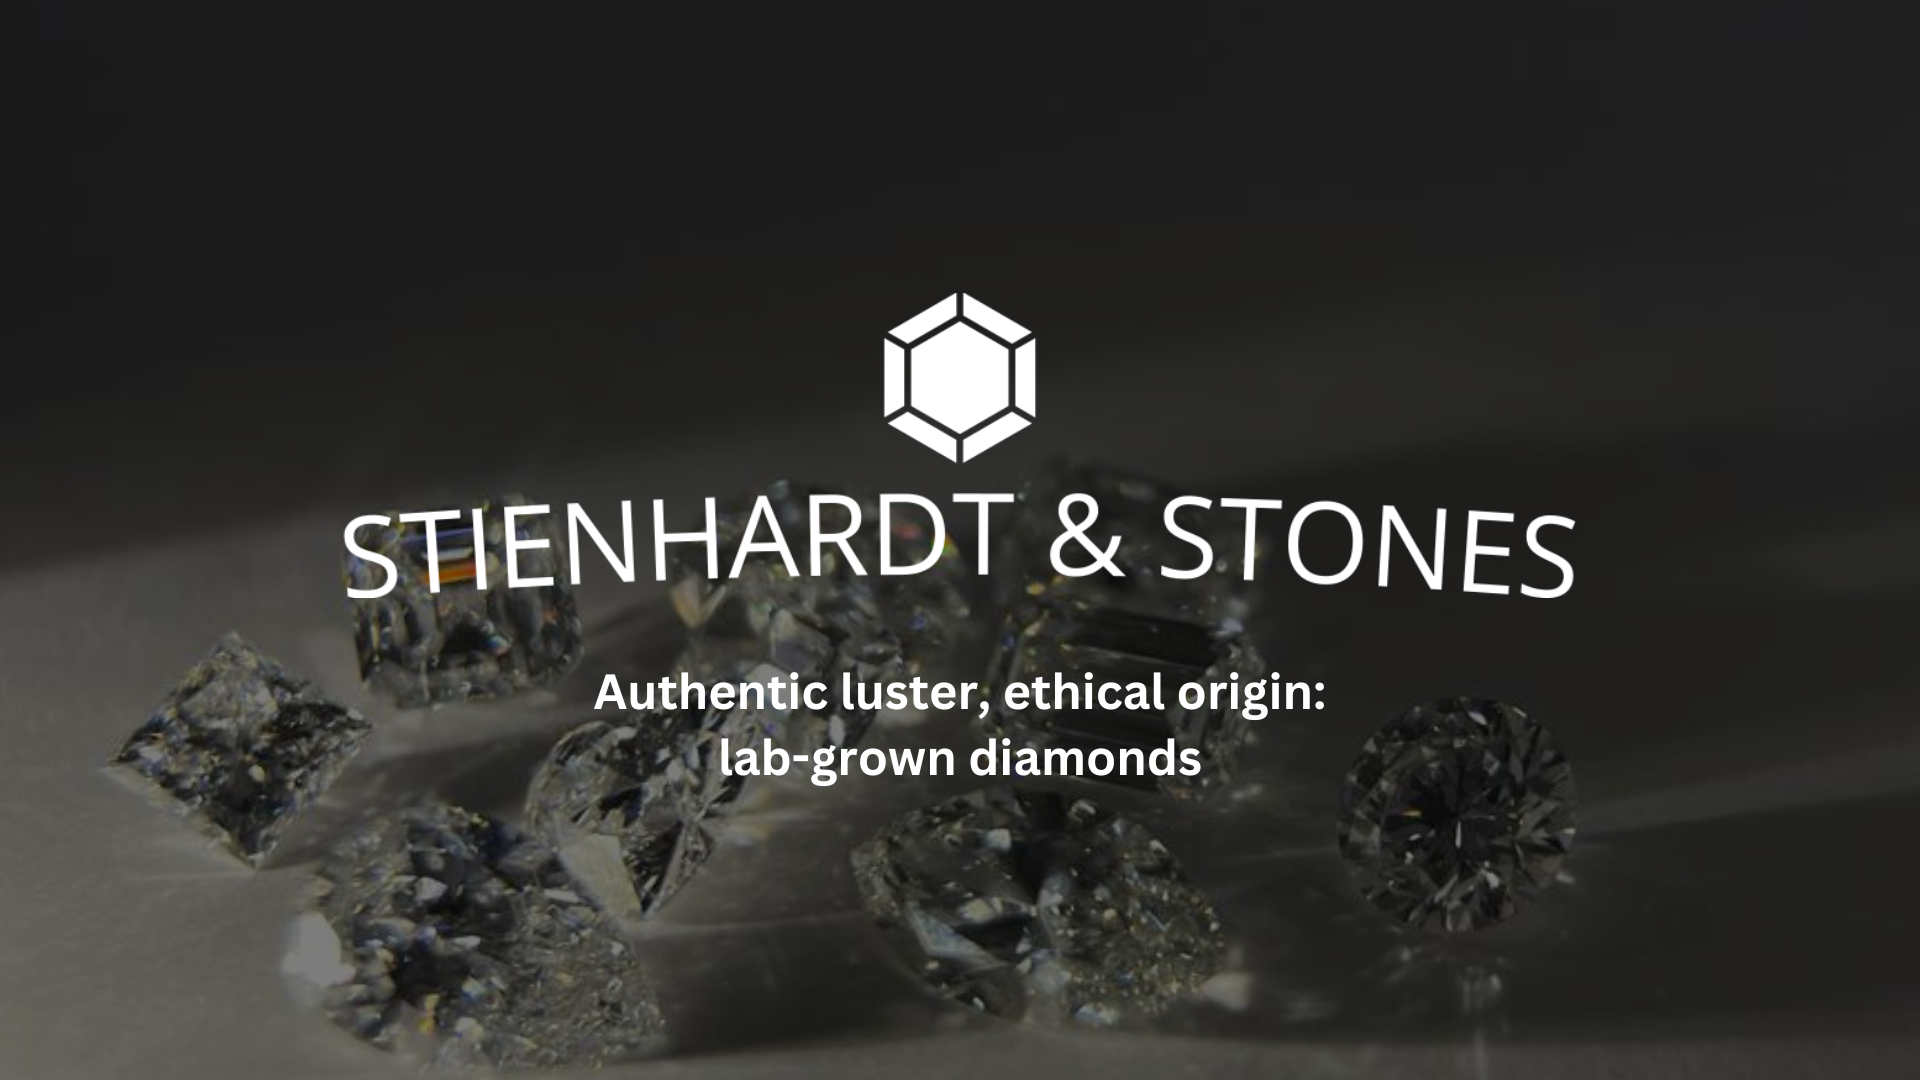 Stienhardt & Stones: Leading Lab-Grown Diamond Manufacturer Now Selling Direct to Consumers